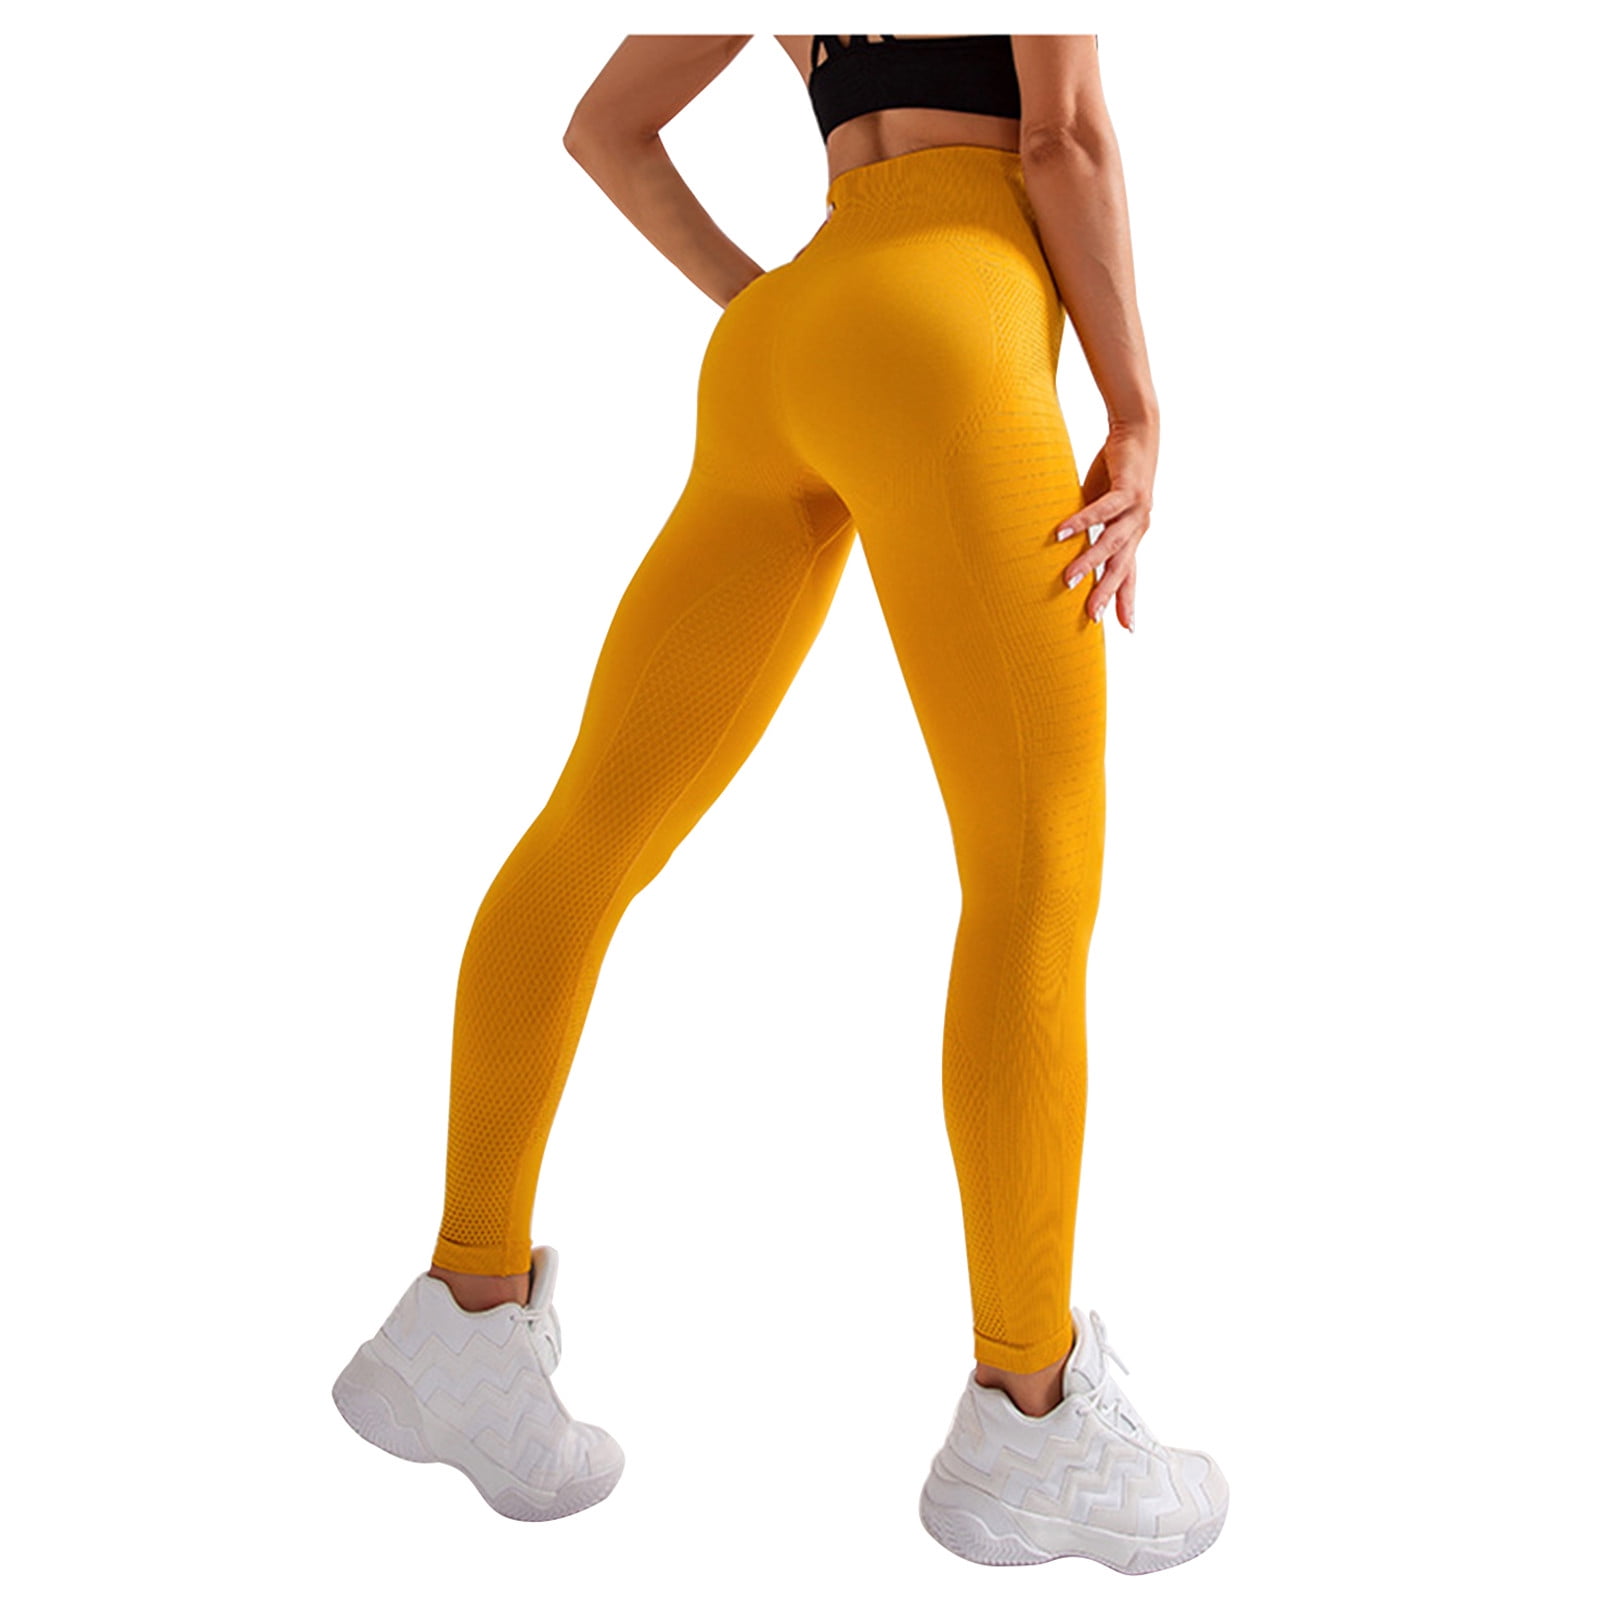 IUGA High Waist Yoga Pants with Pockets, Leggings for Women Tummy Control,  Workout Leggings for Women 4 Way Stretch Mineral Yellow in Bahrain